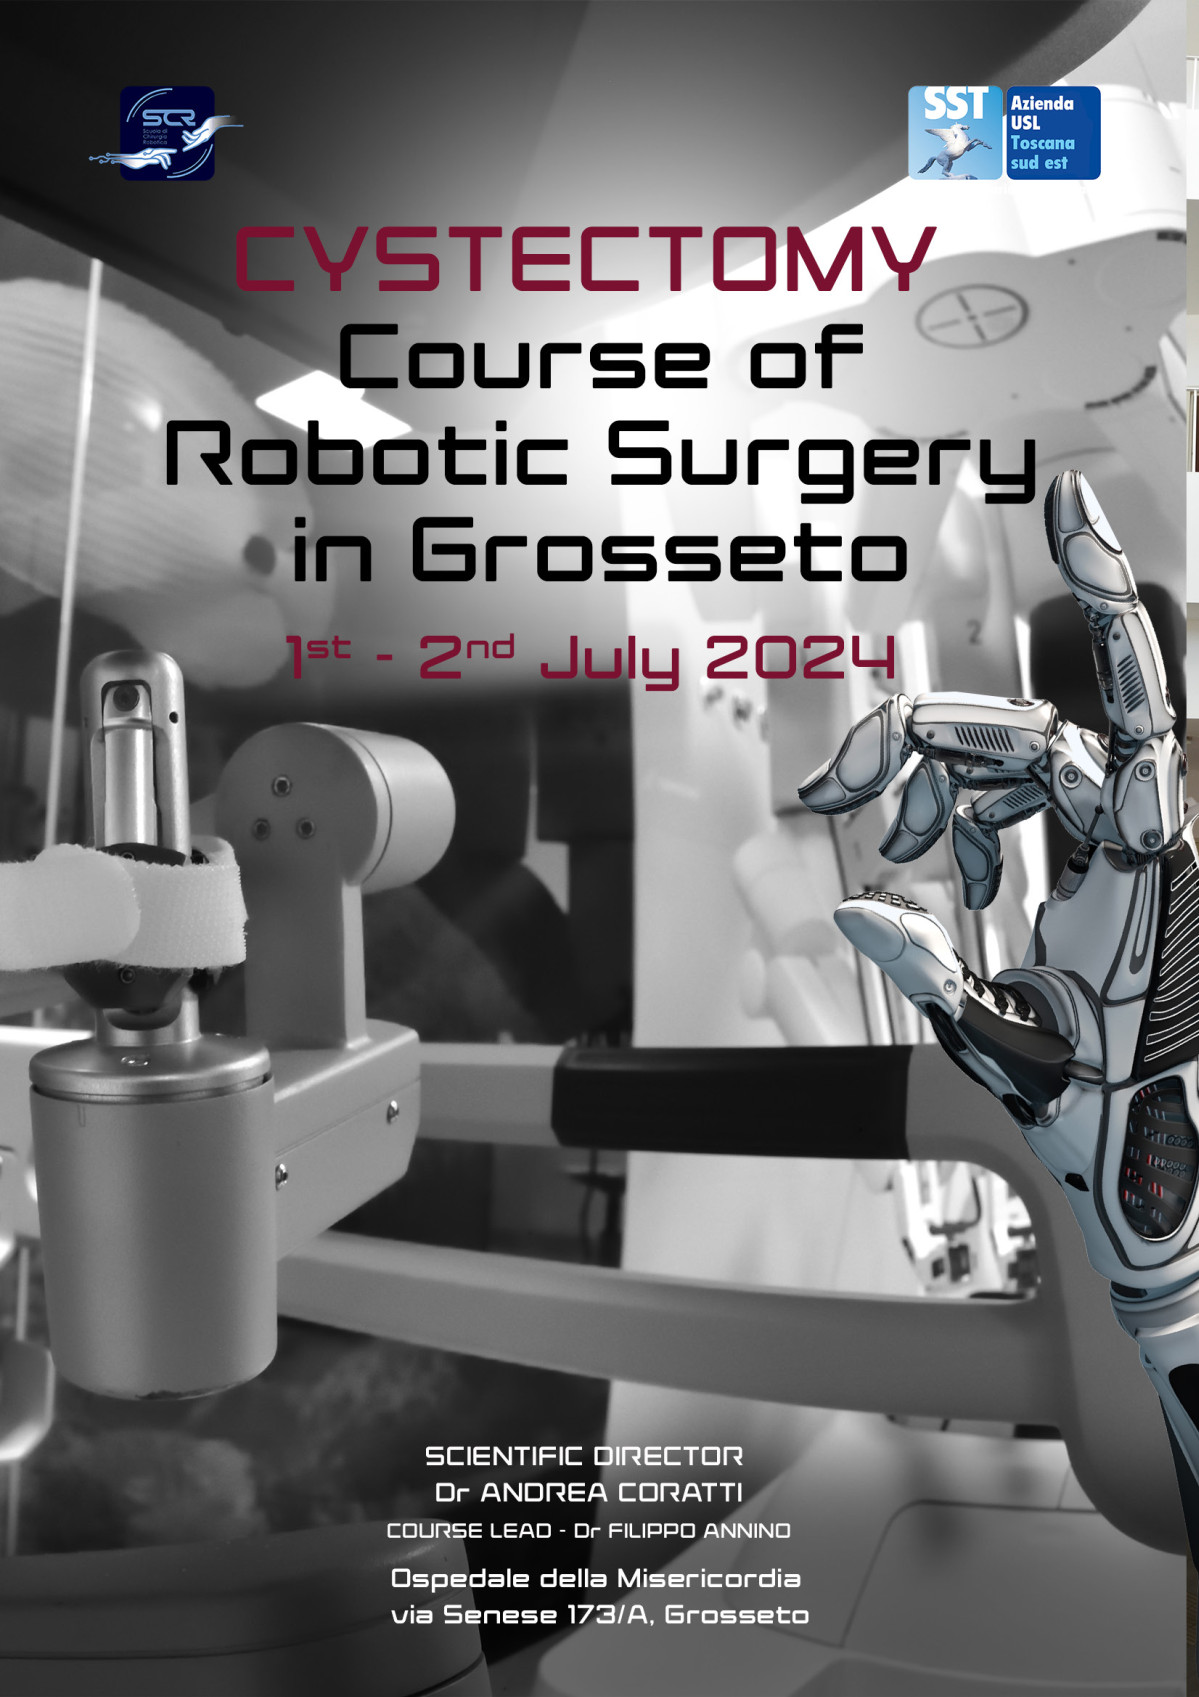 Cystectomy Course of Robotic Surgery in Grosseto July 2024